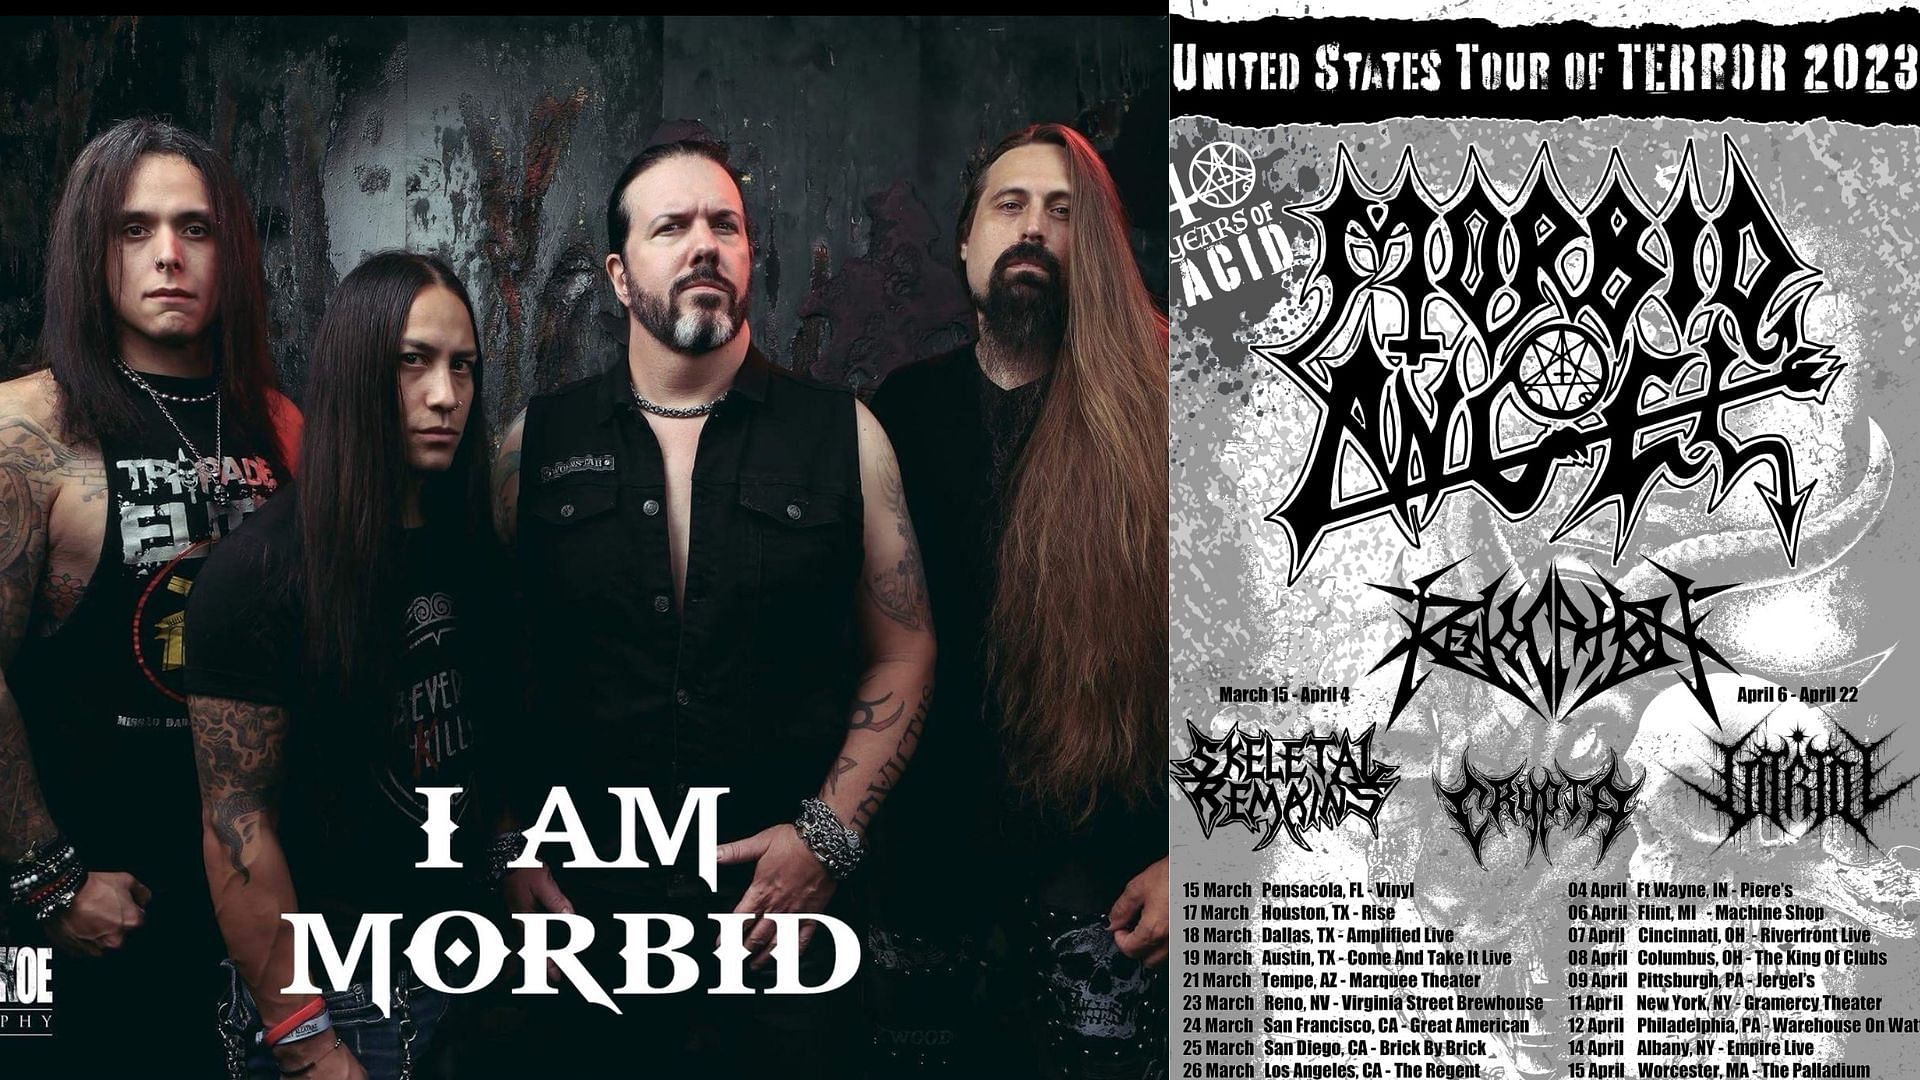 Morbid Angel 2023 Tour Tickets, where to buy, dates, and more